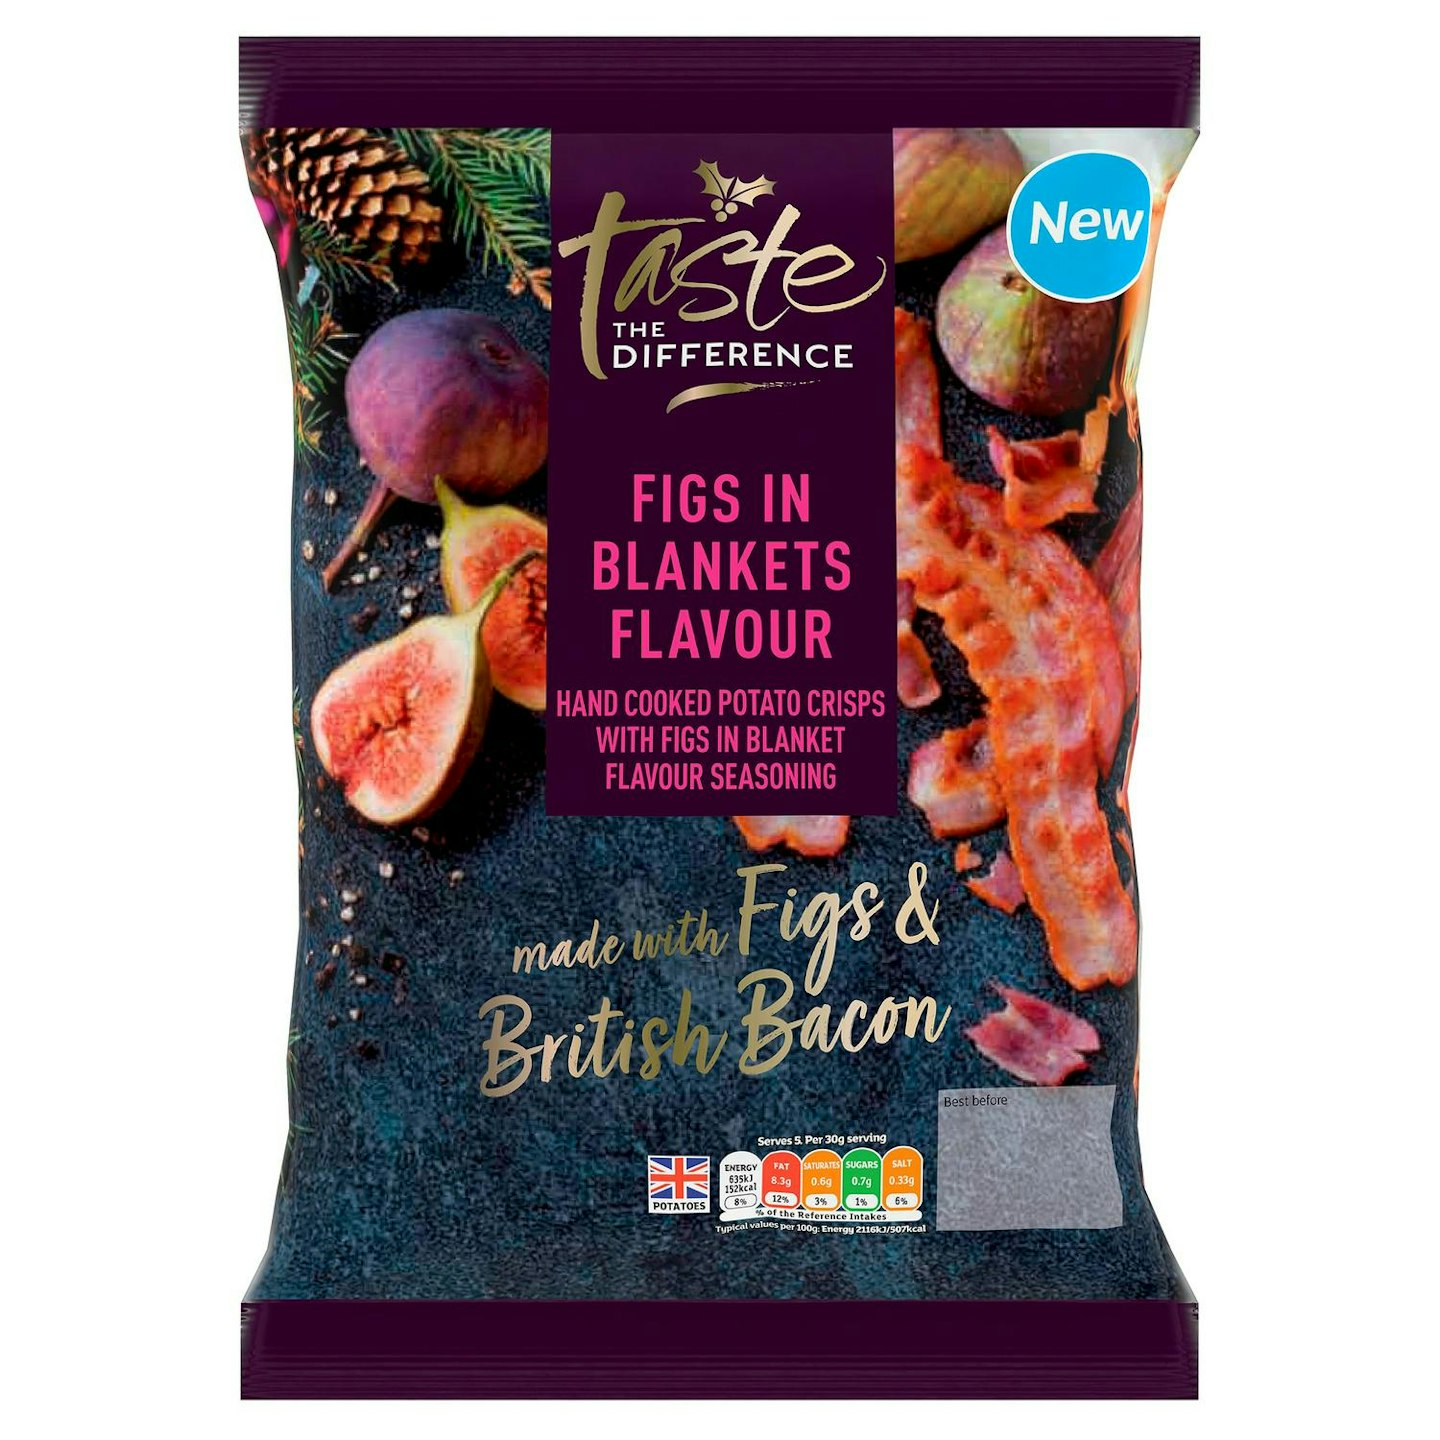 Sainsbury's Figs in Blankets Flavour, Taste the Difference, £1.35